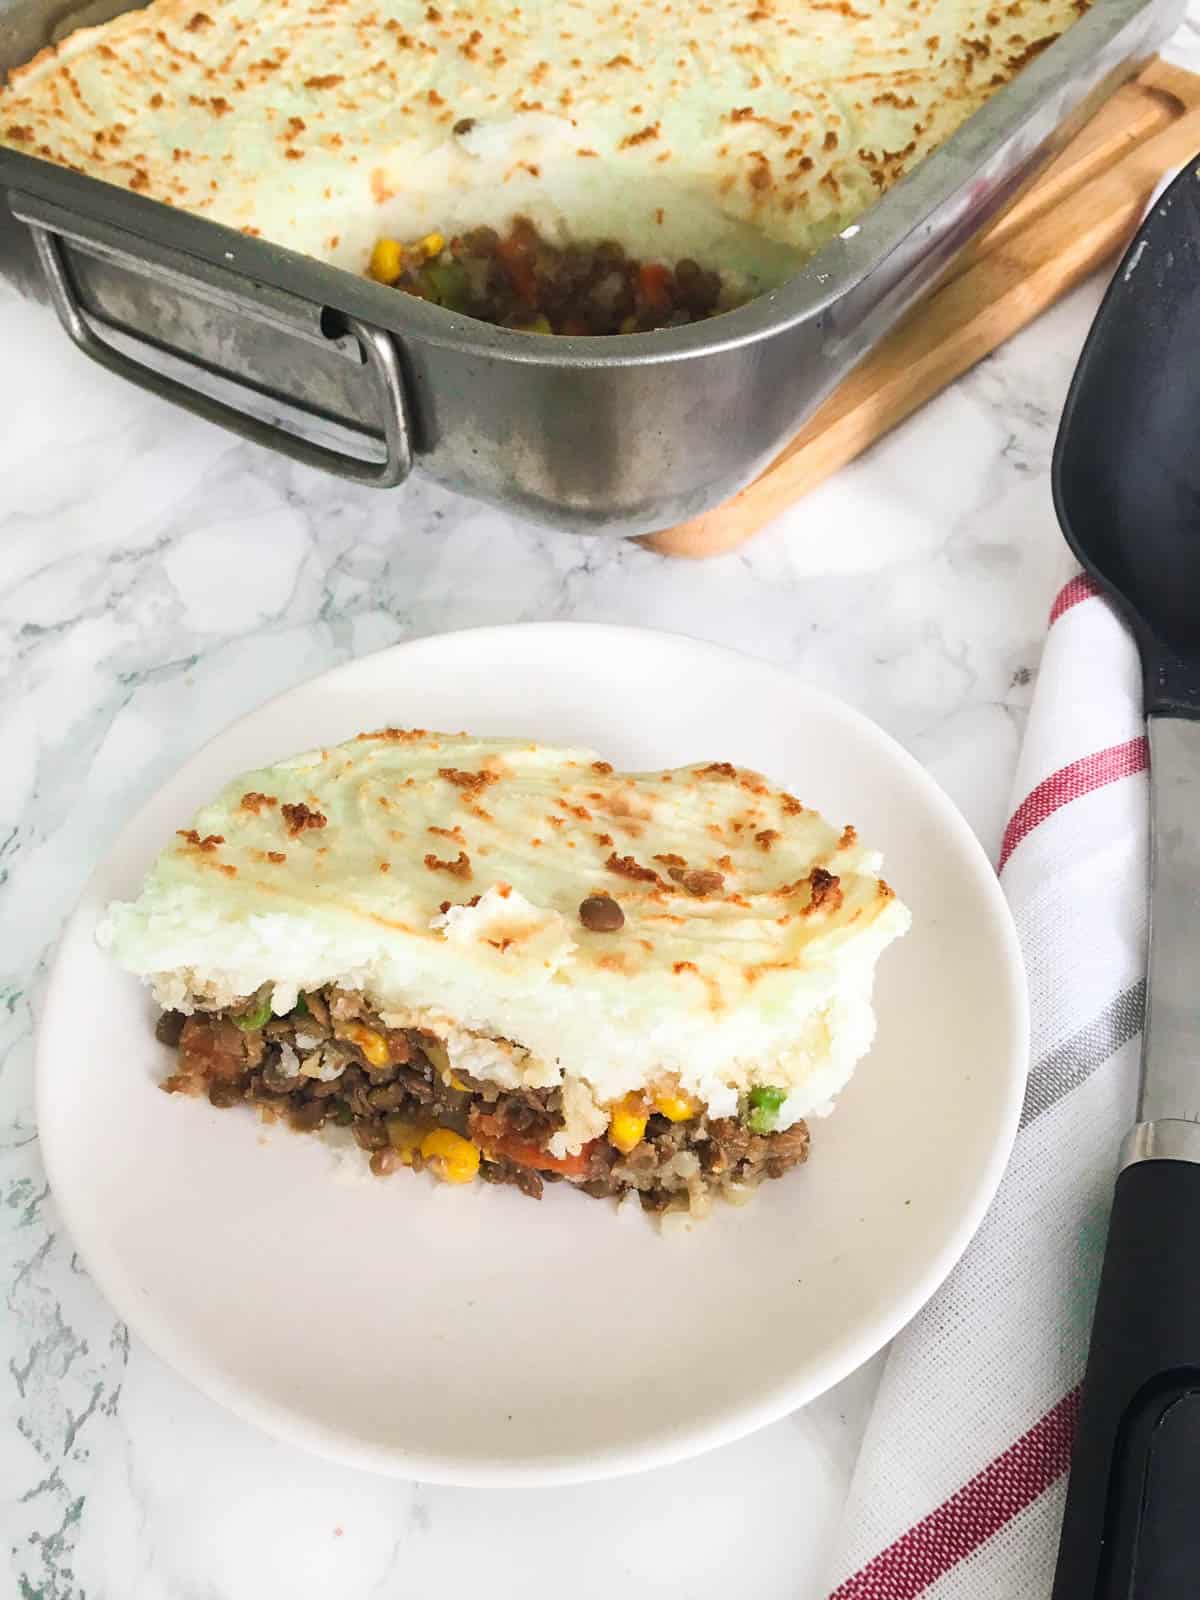 Lentil shepherd's pie on small white dish with tray in the background.